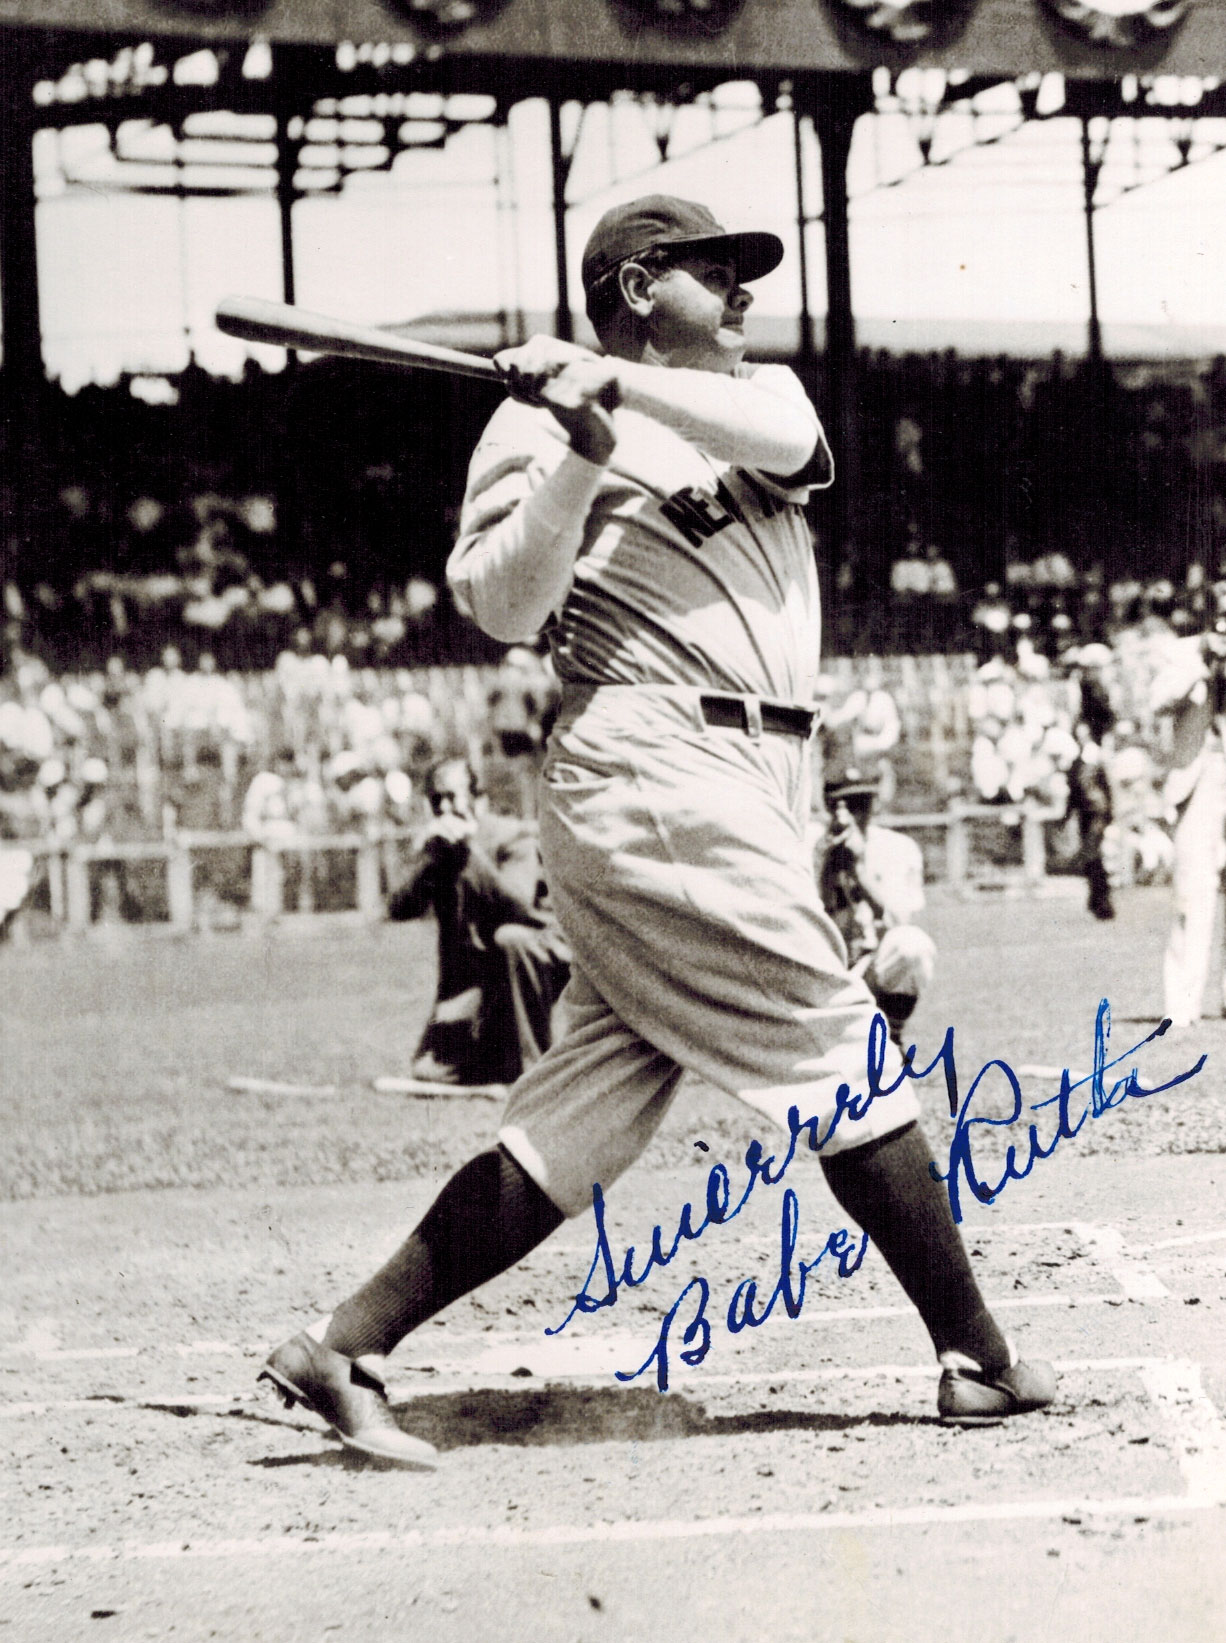 A photograph of Babe Ruth, autographed by the New York Yankees slugger, is estimated at $4,000-$6,000. MBA/Seattle Auction House images.